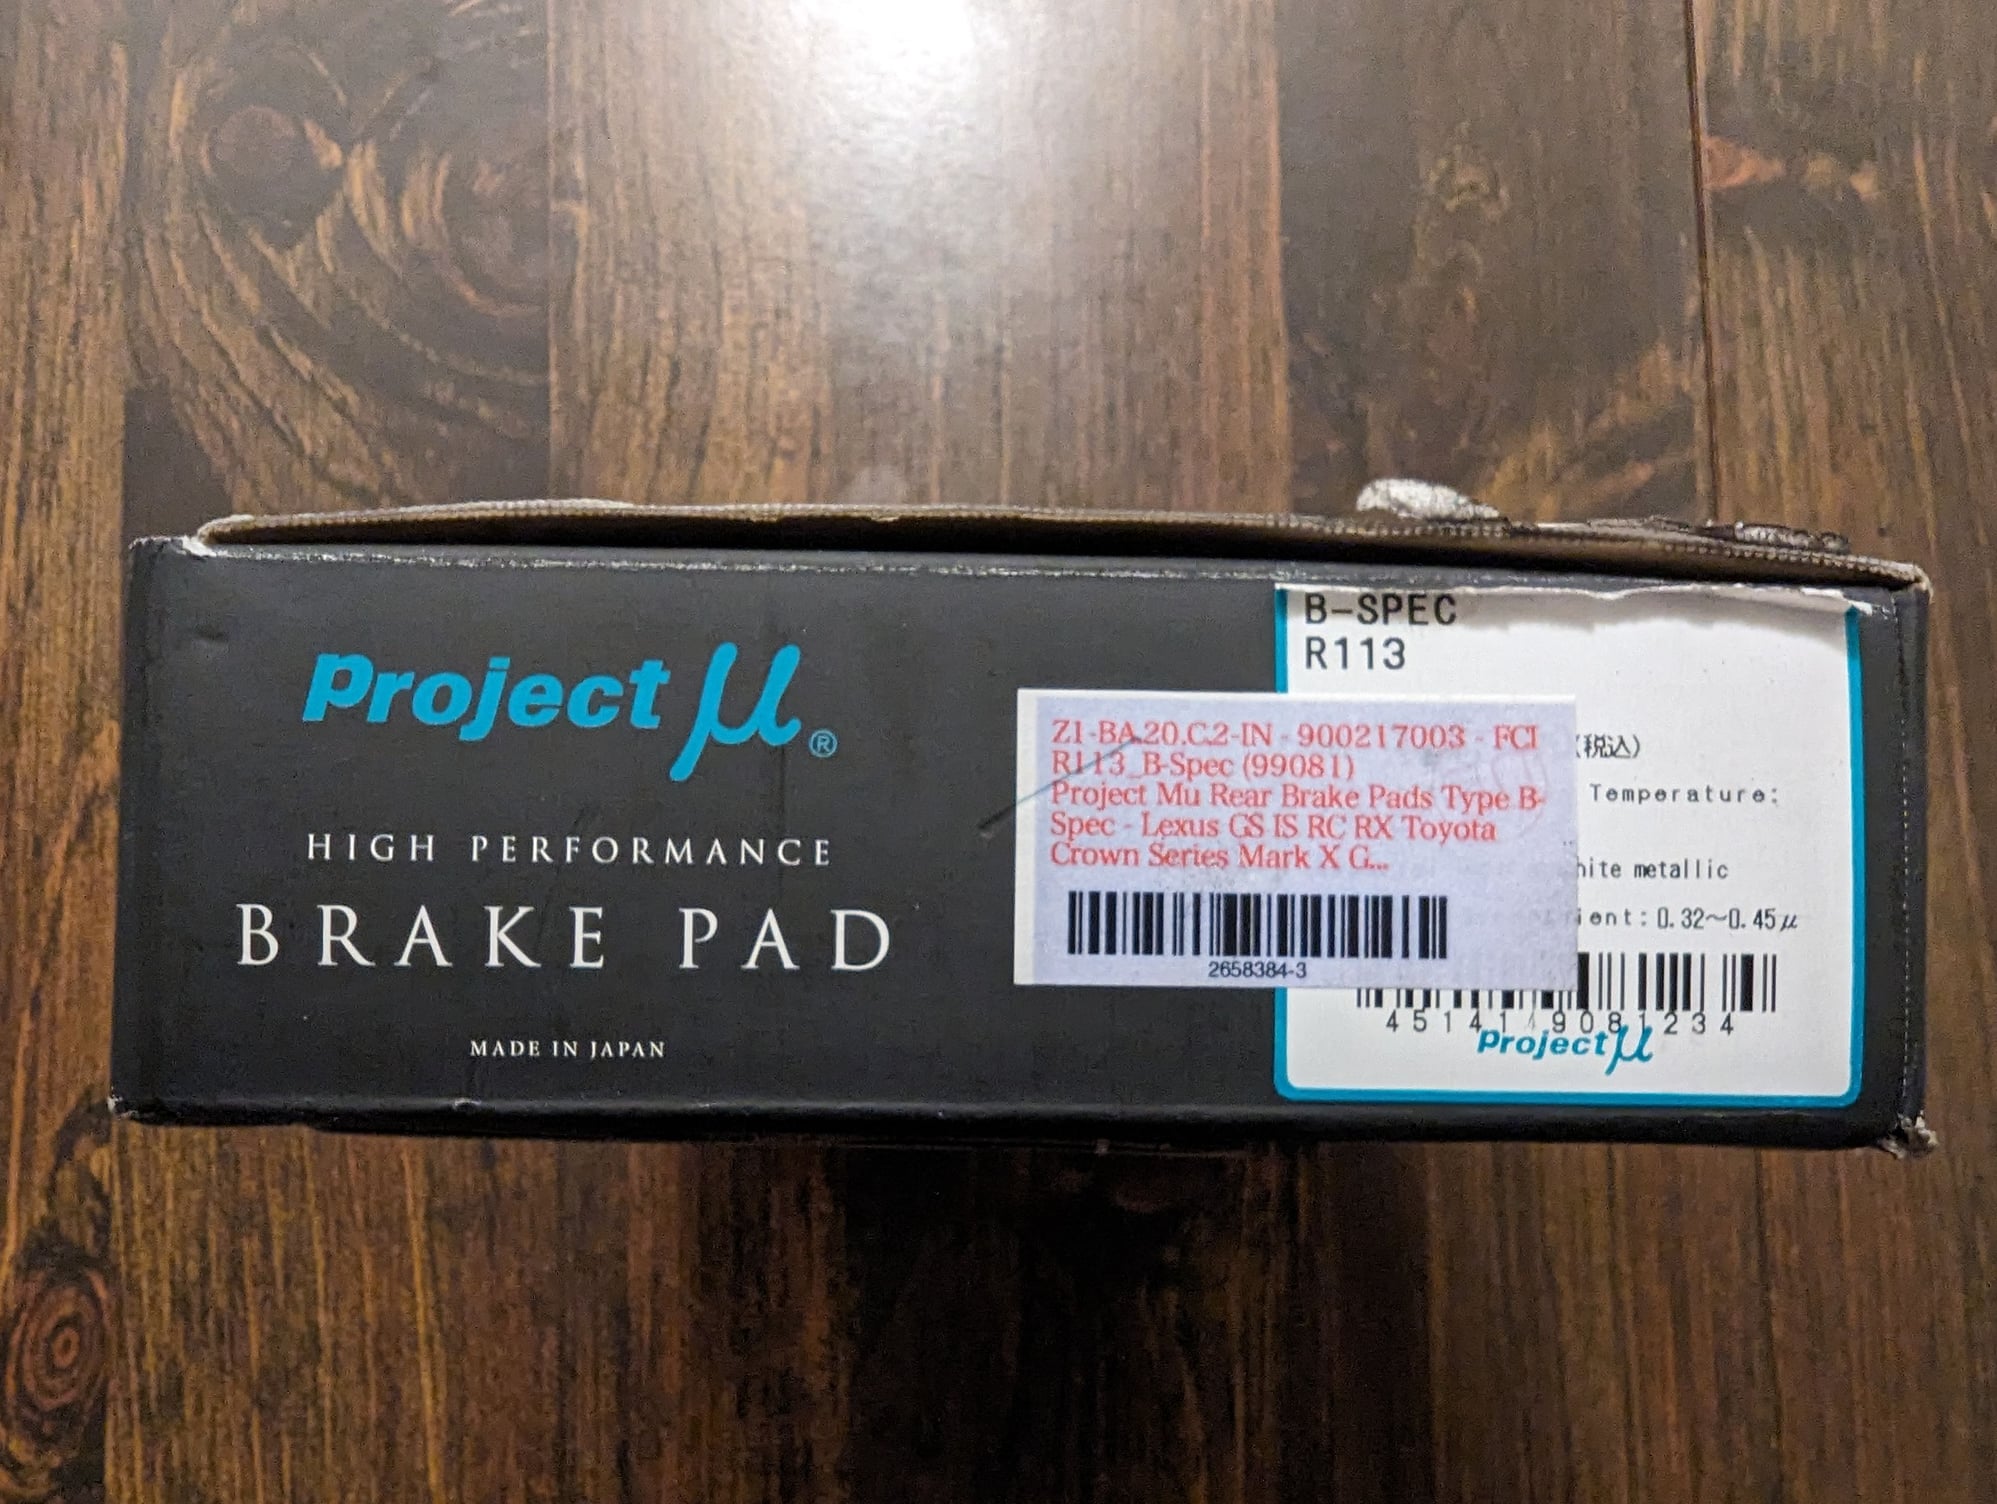 Brakes - Project Mu B-Spec Rear Brake Pads IS/GS/RC - New - All Years  All Models - Cypress, CA 90630, United States